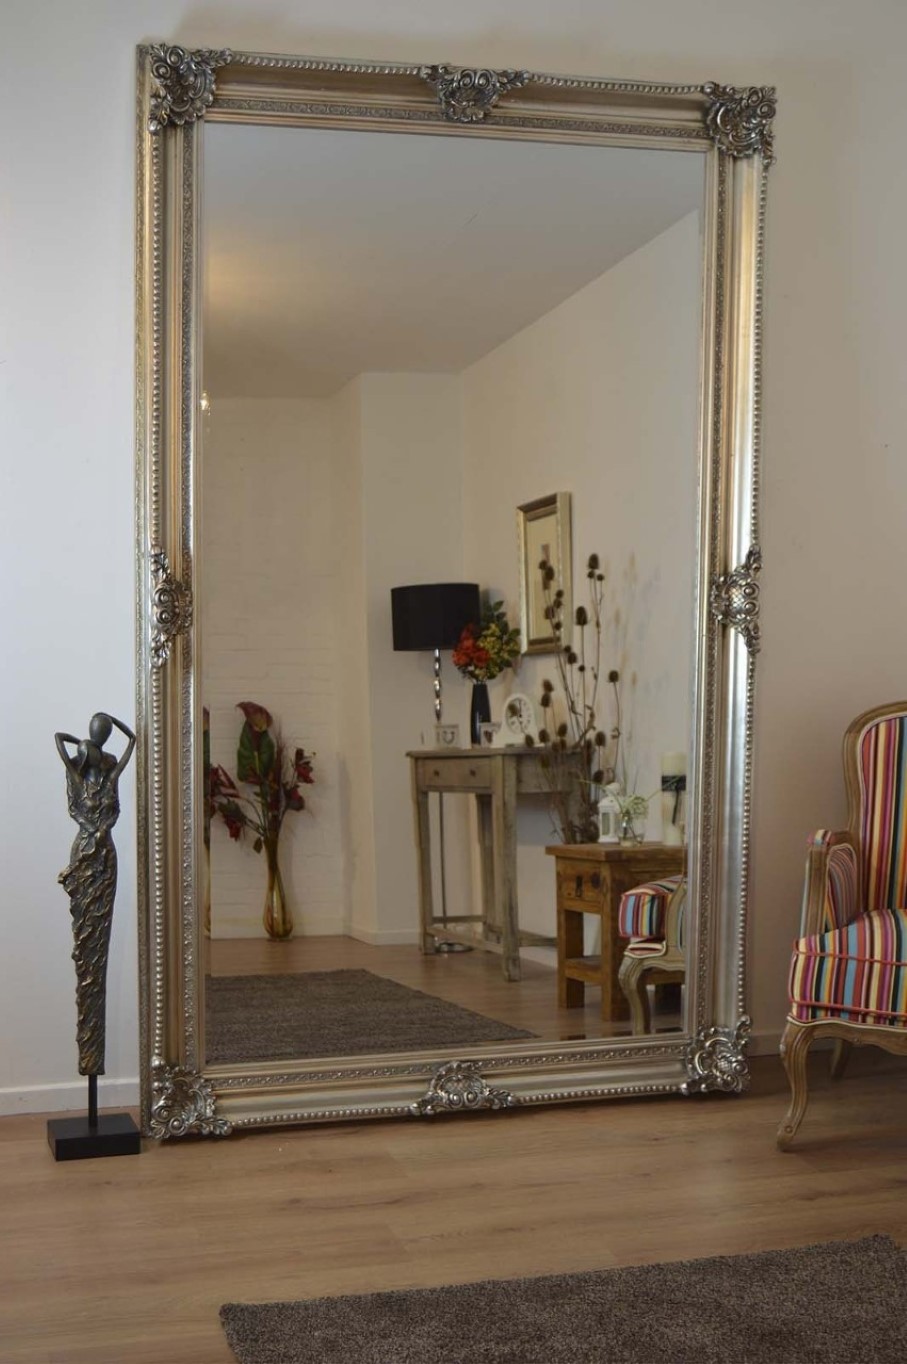 Large Wall Ornately Wonderful Large Wall Mirror With Ornately Frame Design Idea Feat Antique Floor Display And Stripes Accent Chair House Designs  Maximize Your Reflection On A Large Wall Mirror 